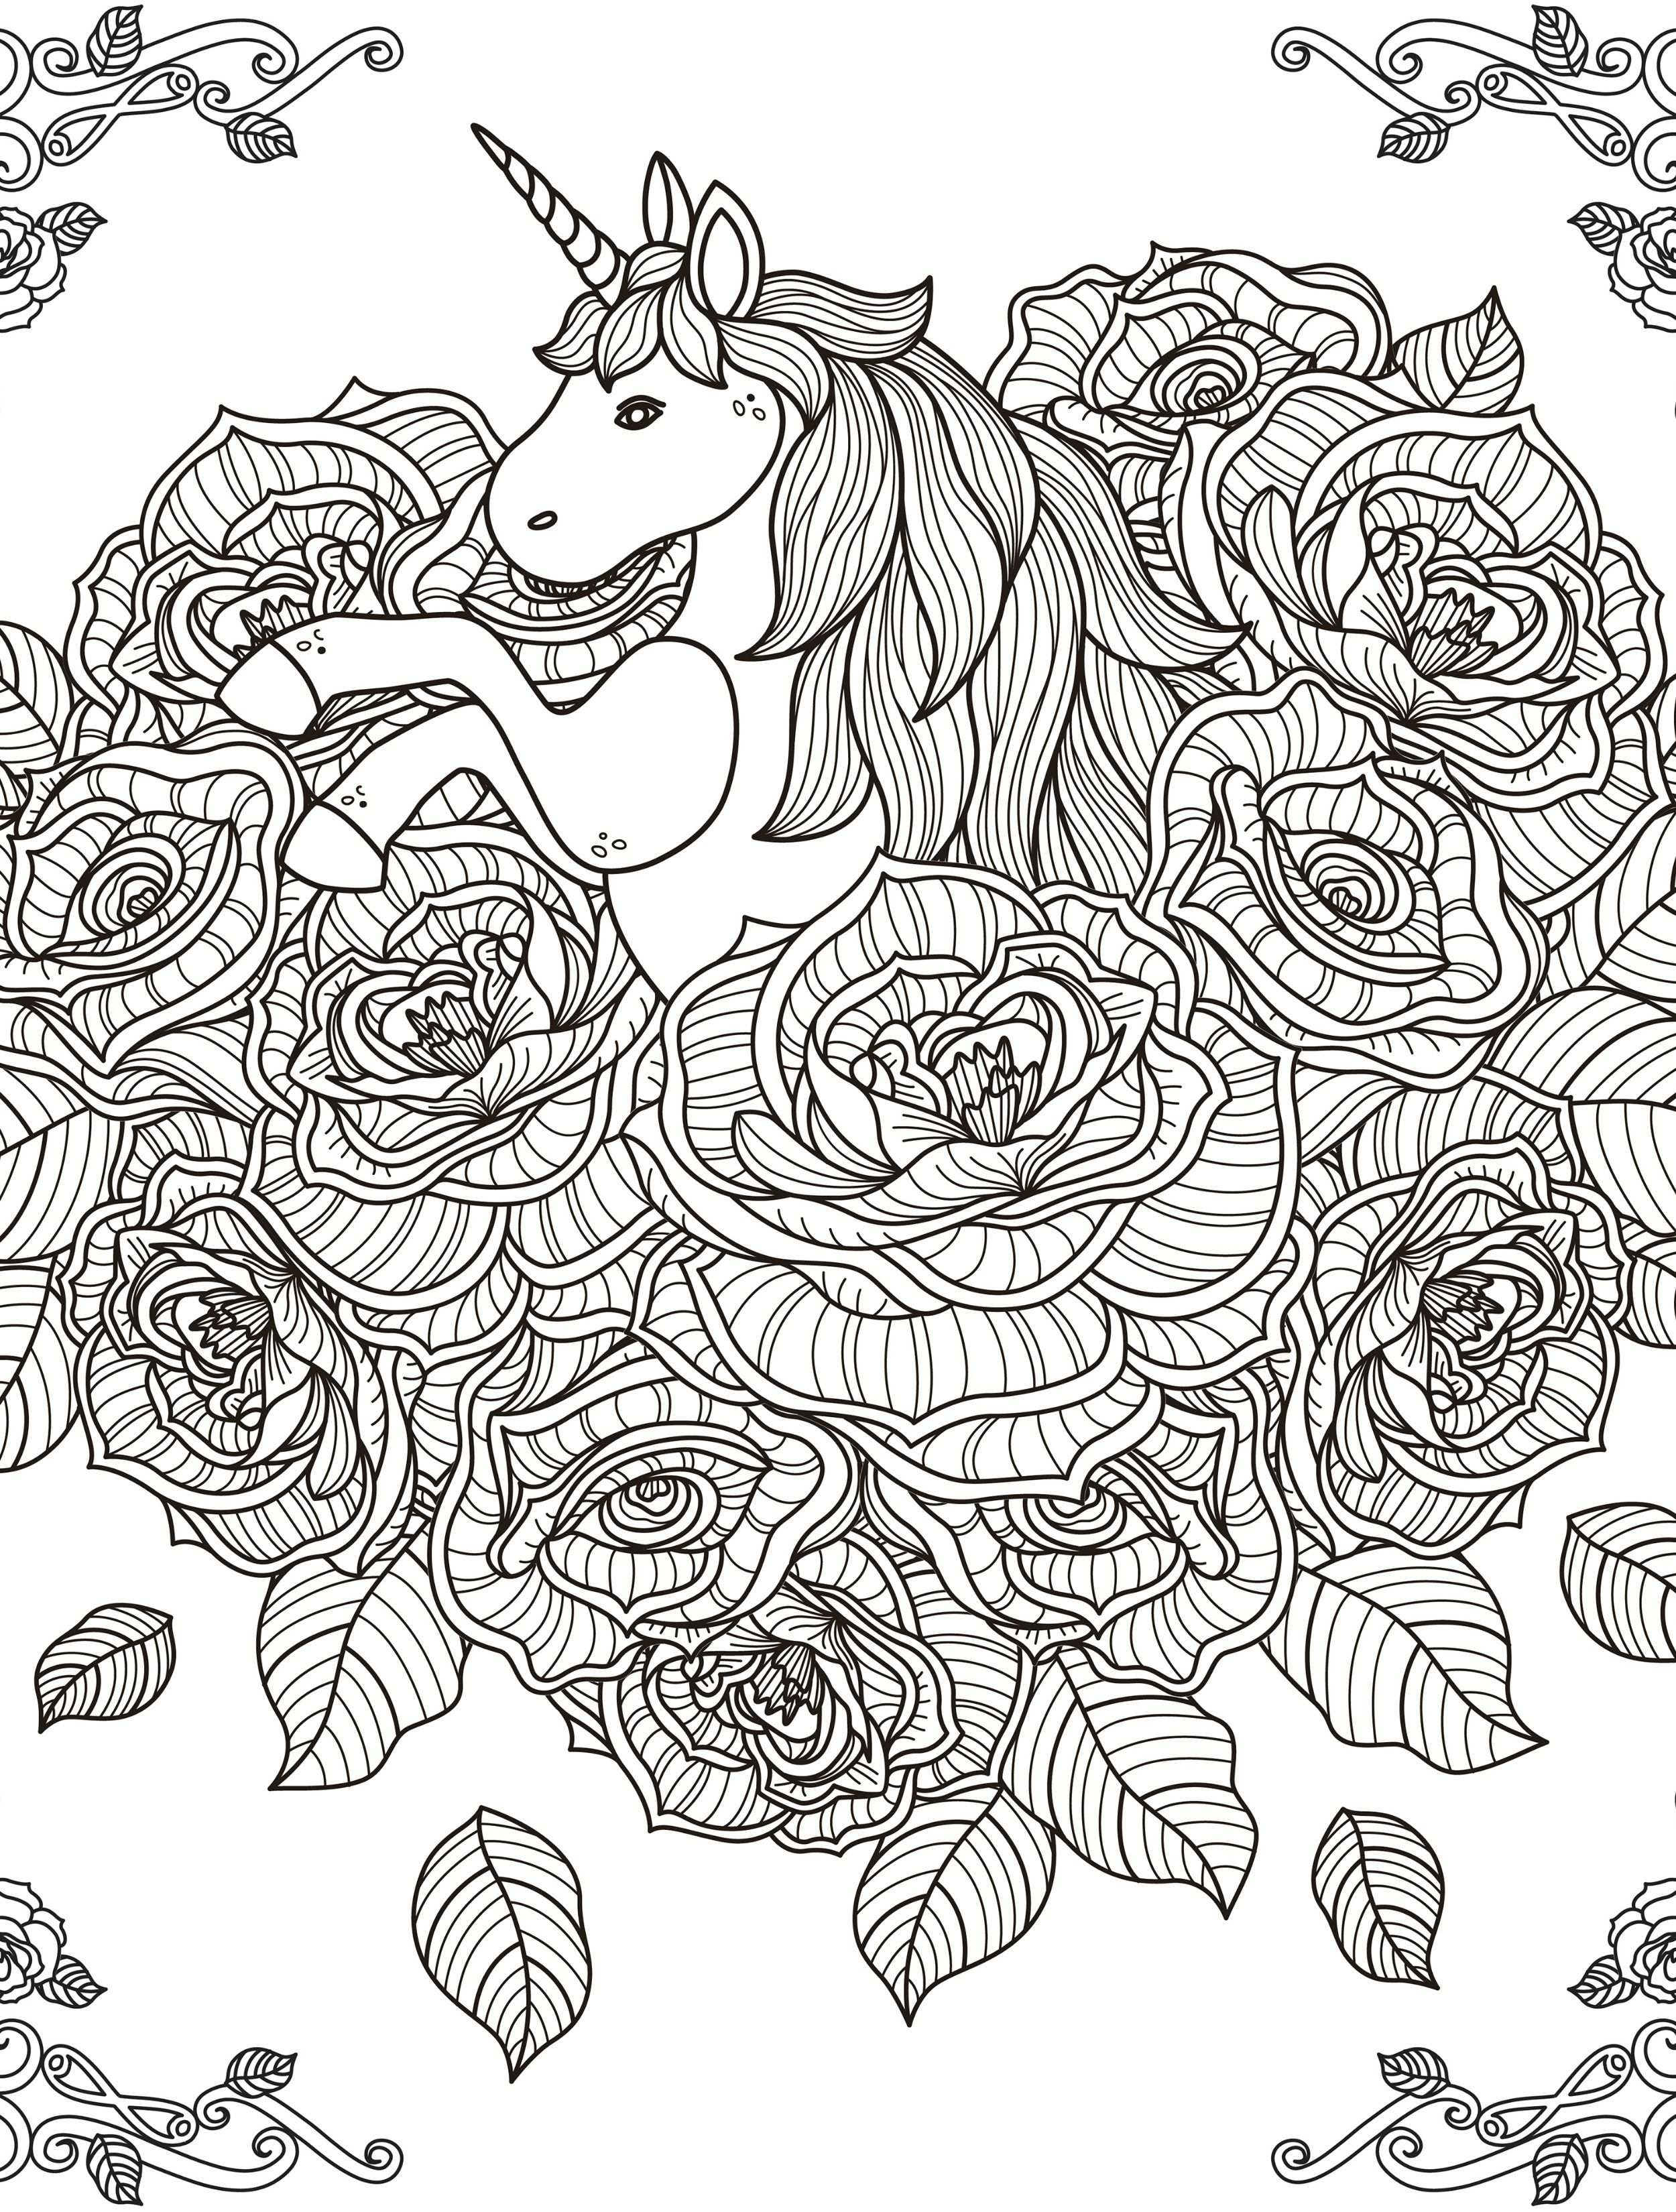 Unicorn Coloring Page For Adults Printable1 Jpg 2 500 3 300 Pixels